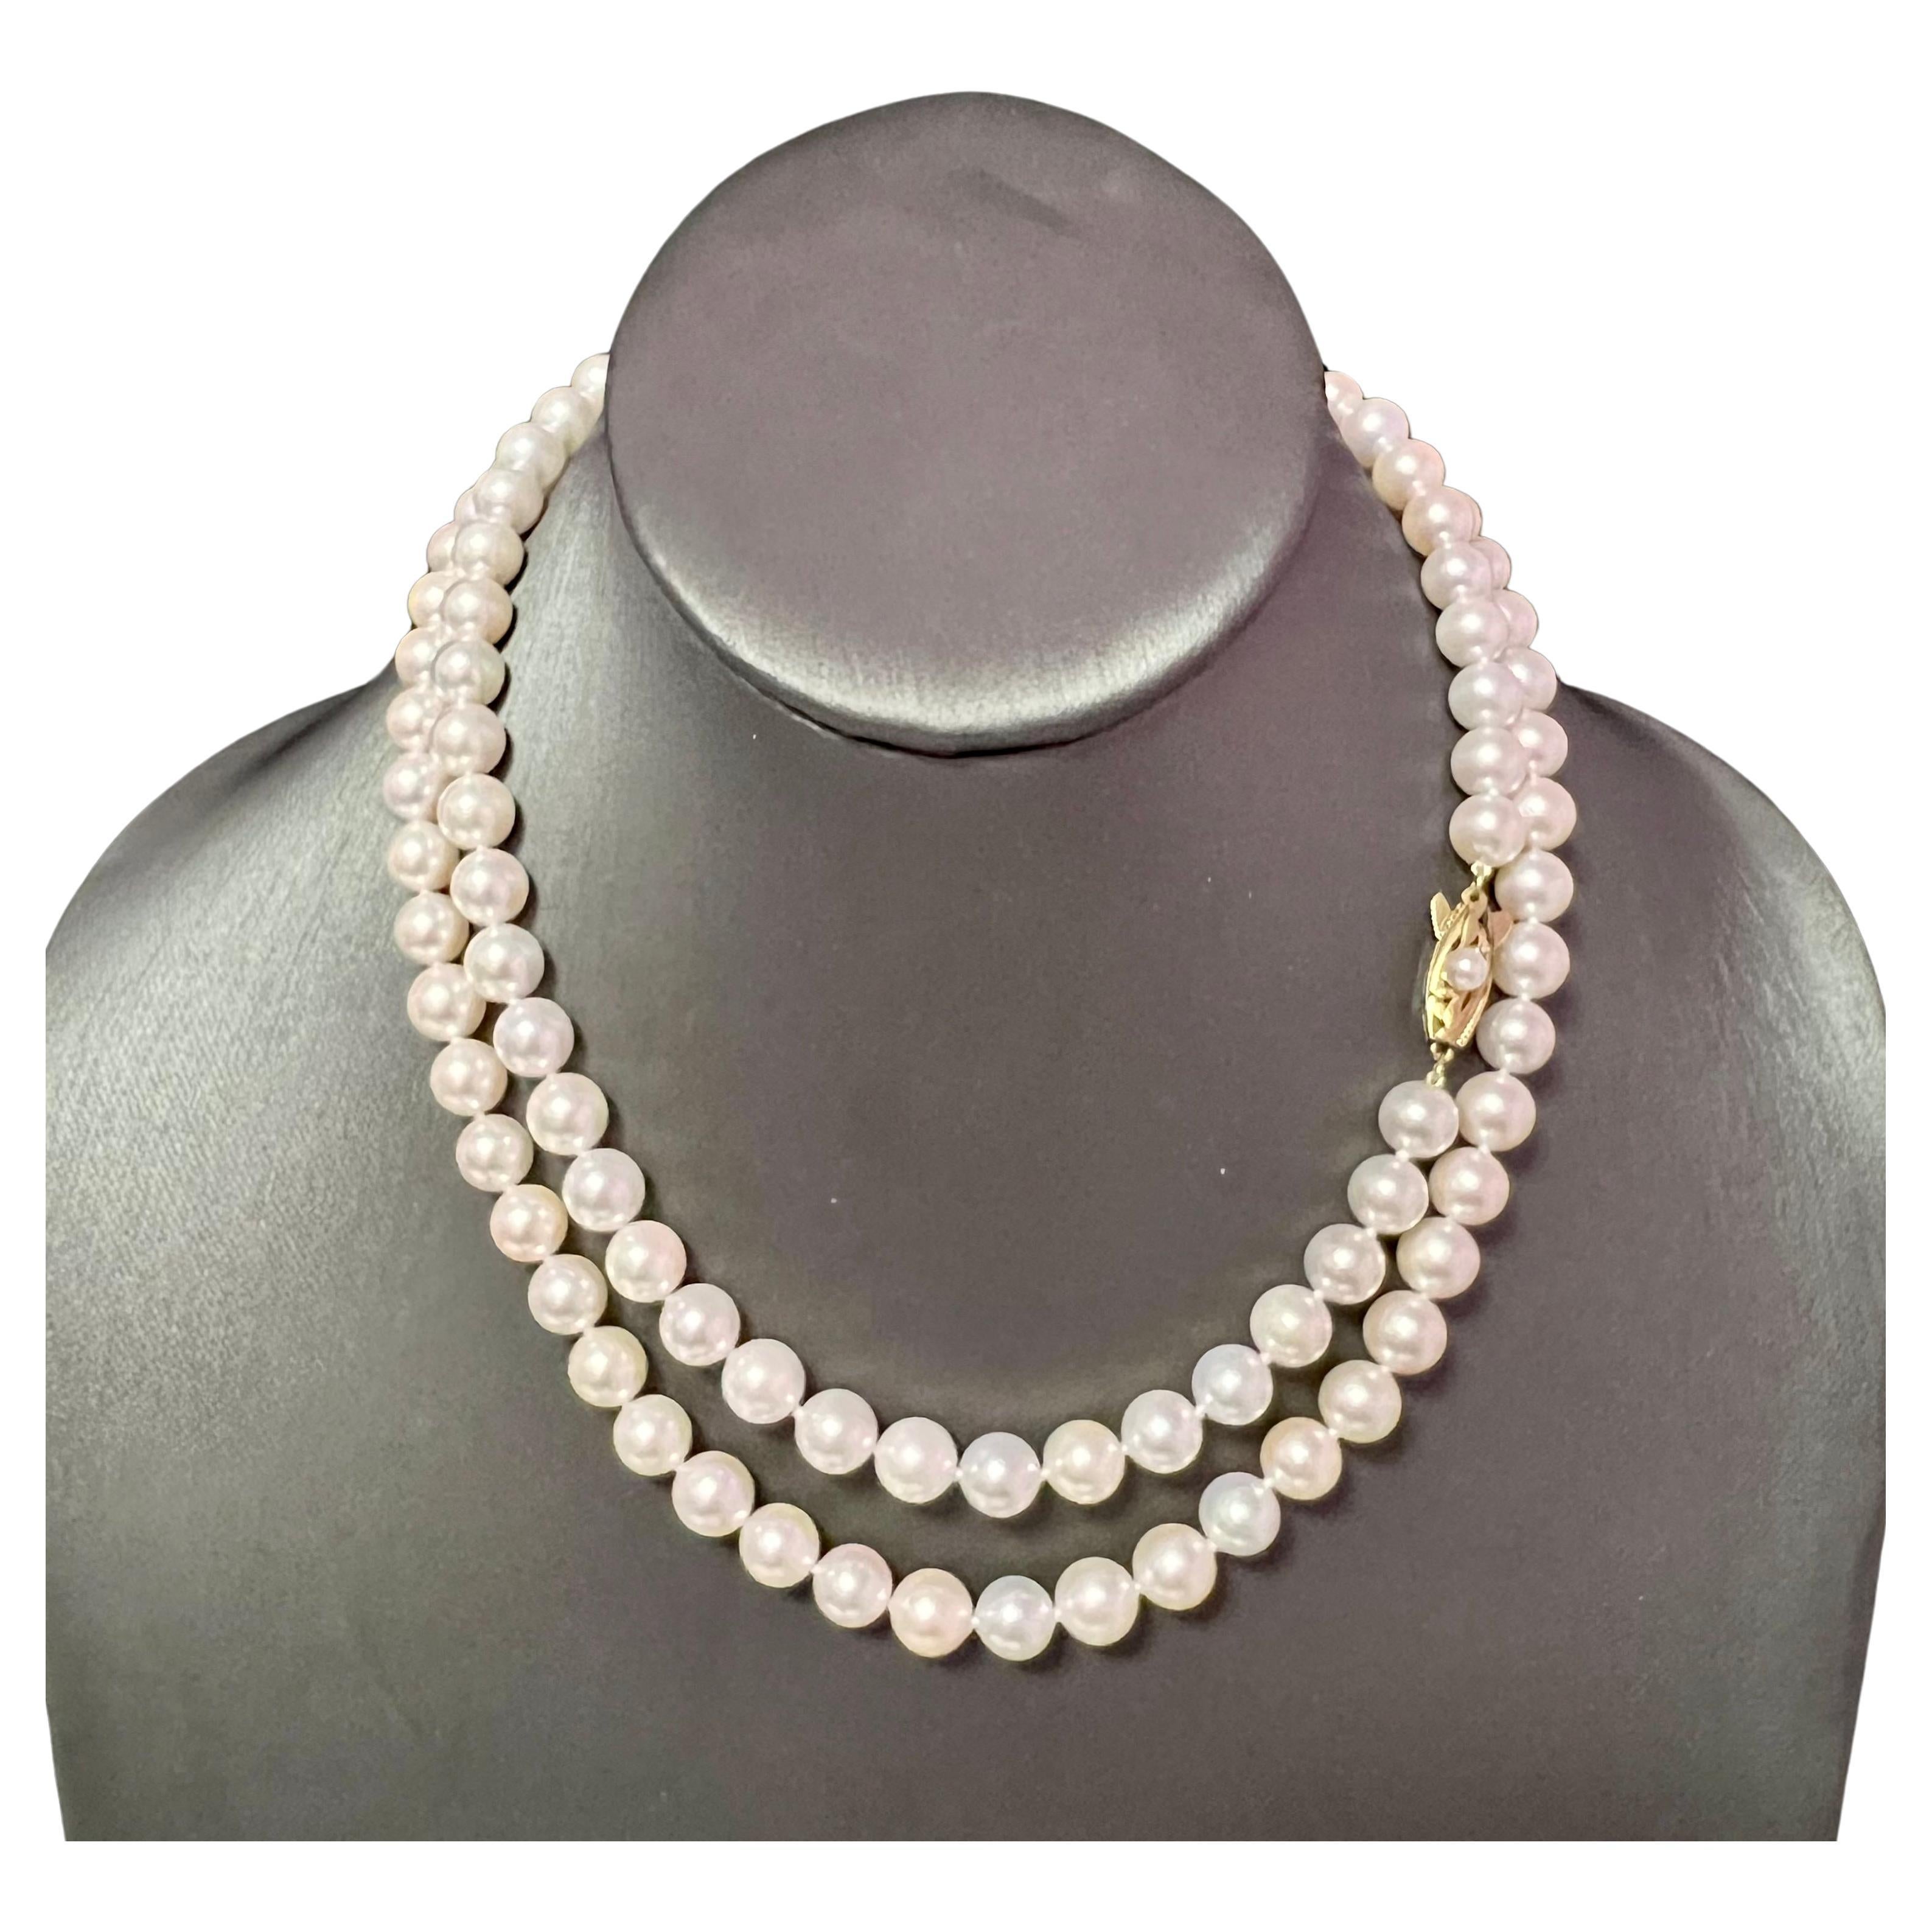 Mikimoto Estate Akoya Pearl Necklace 34" 14k Y Gold 8 mm Certified